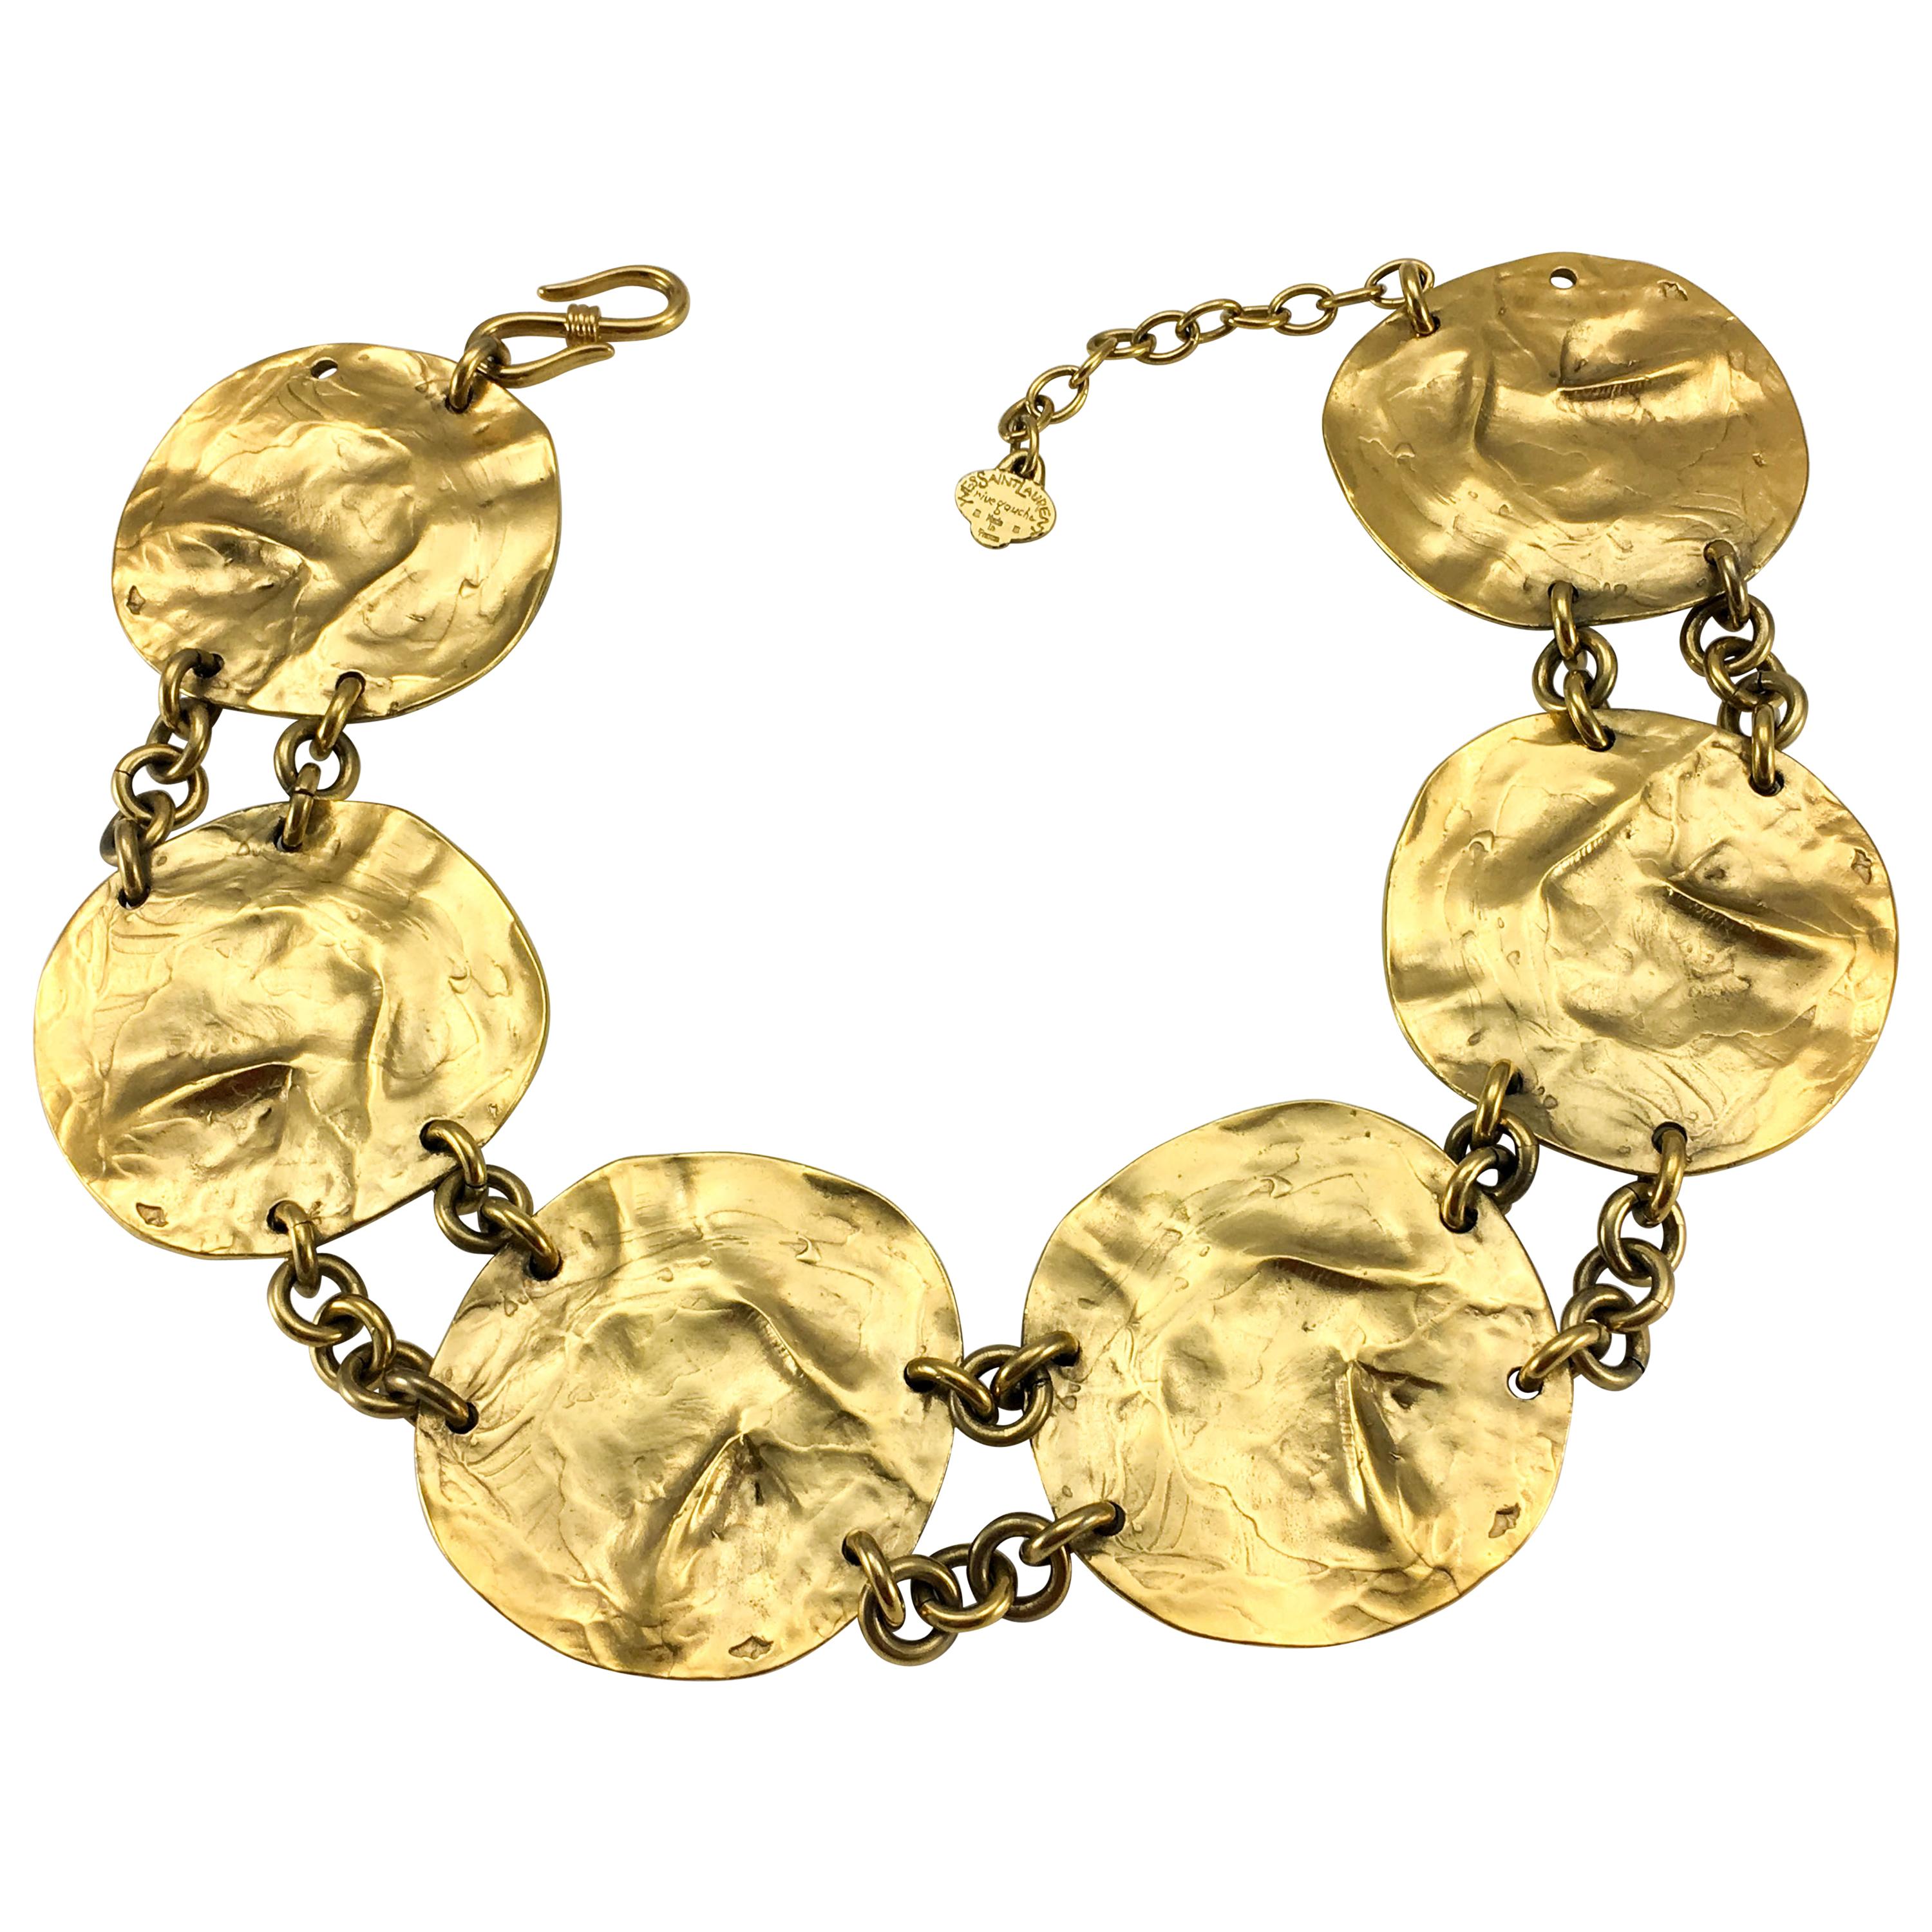 Yves Saint Laurent by Robert Goossens Gold-Plated Disk Necklace, 1989  